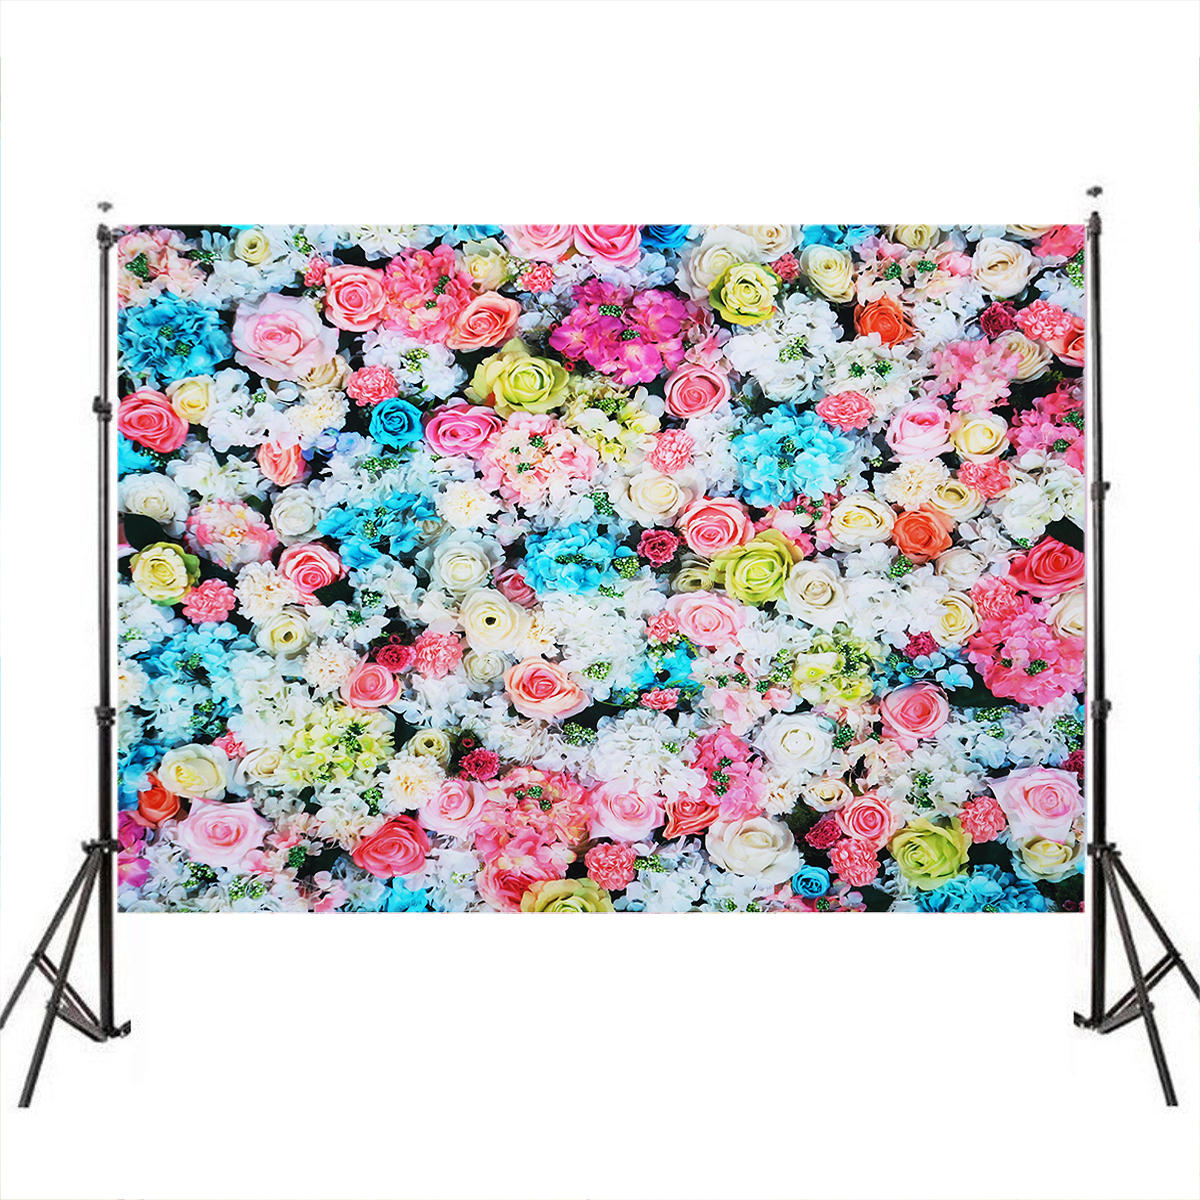 3x5FT 5x7FT Vinyl Pink Blue Rose Wall Photography Backdrop Background Studio Prop